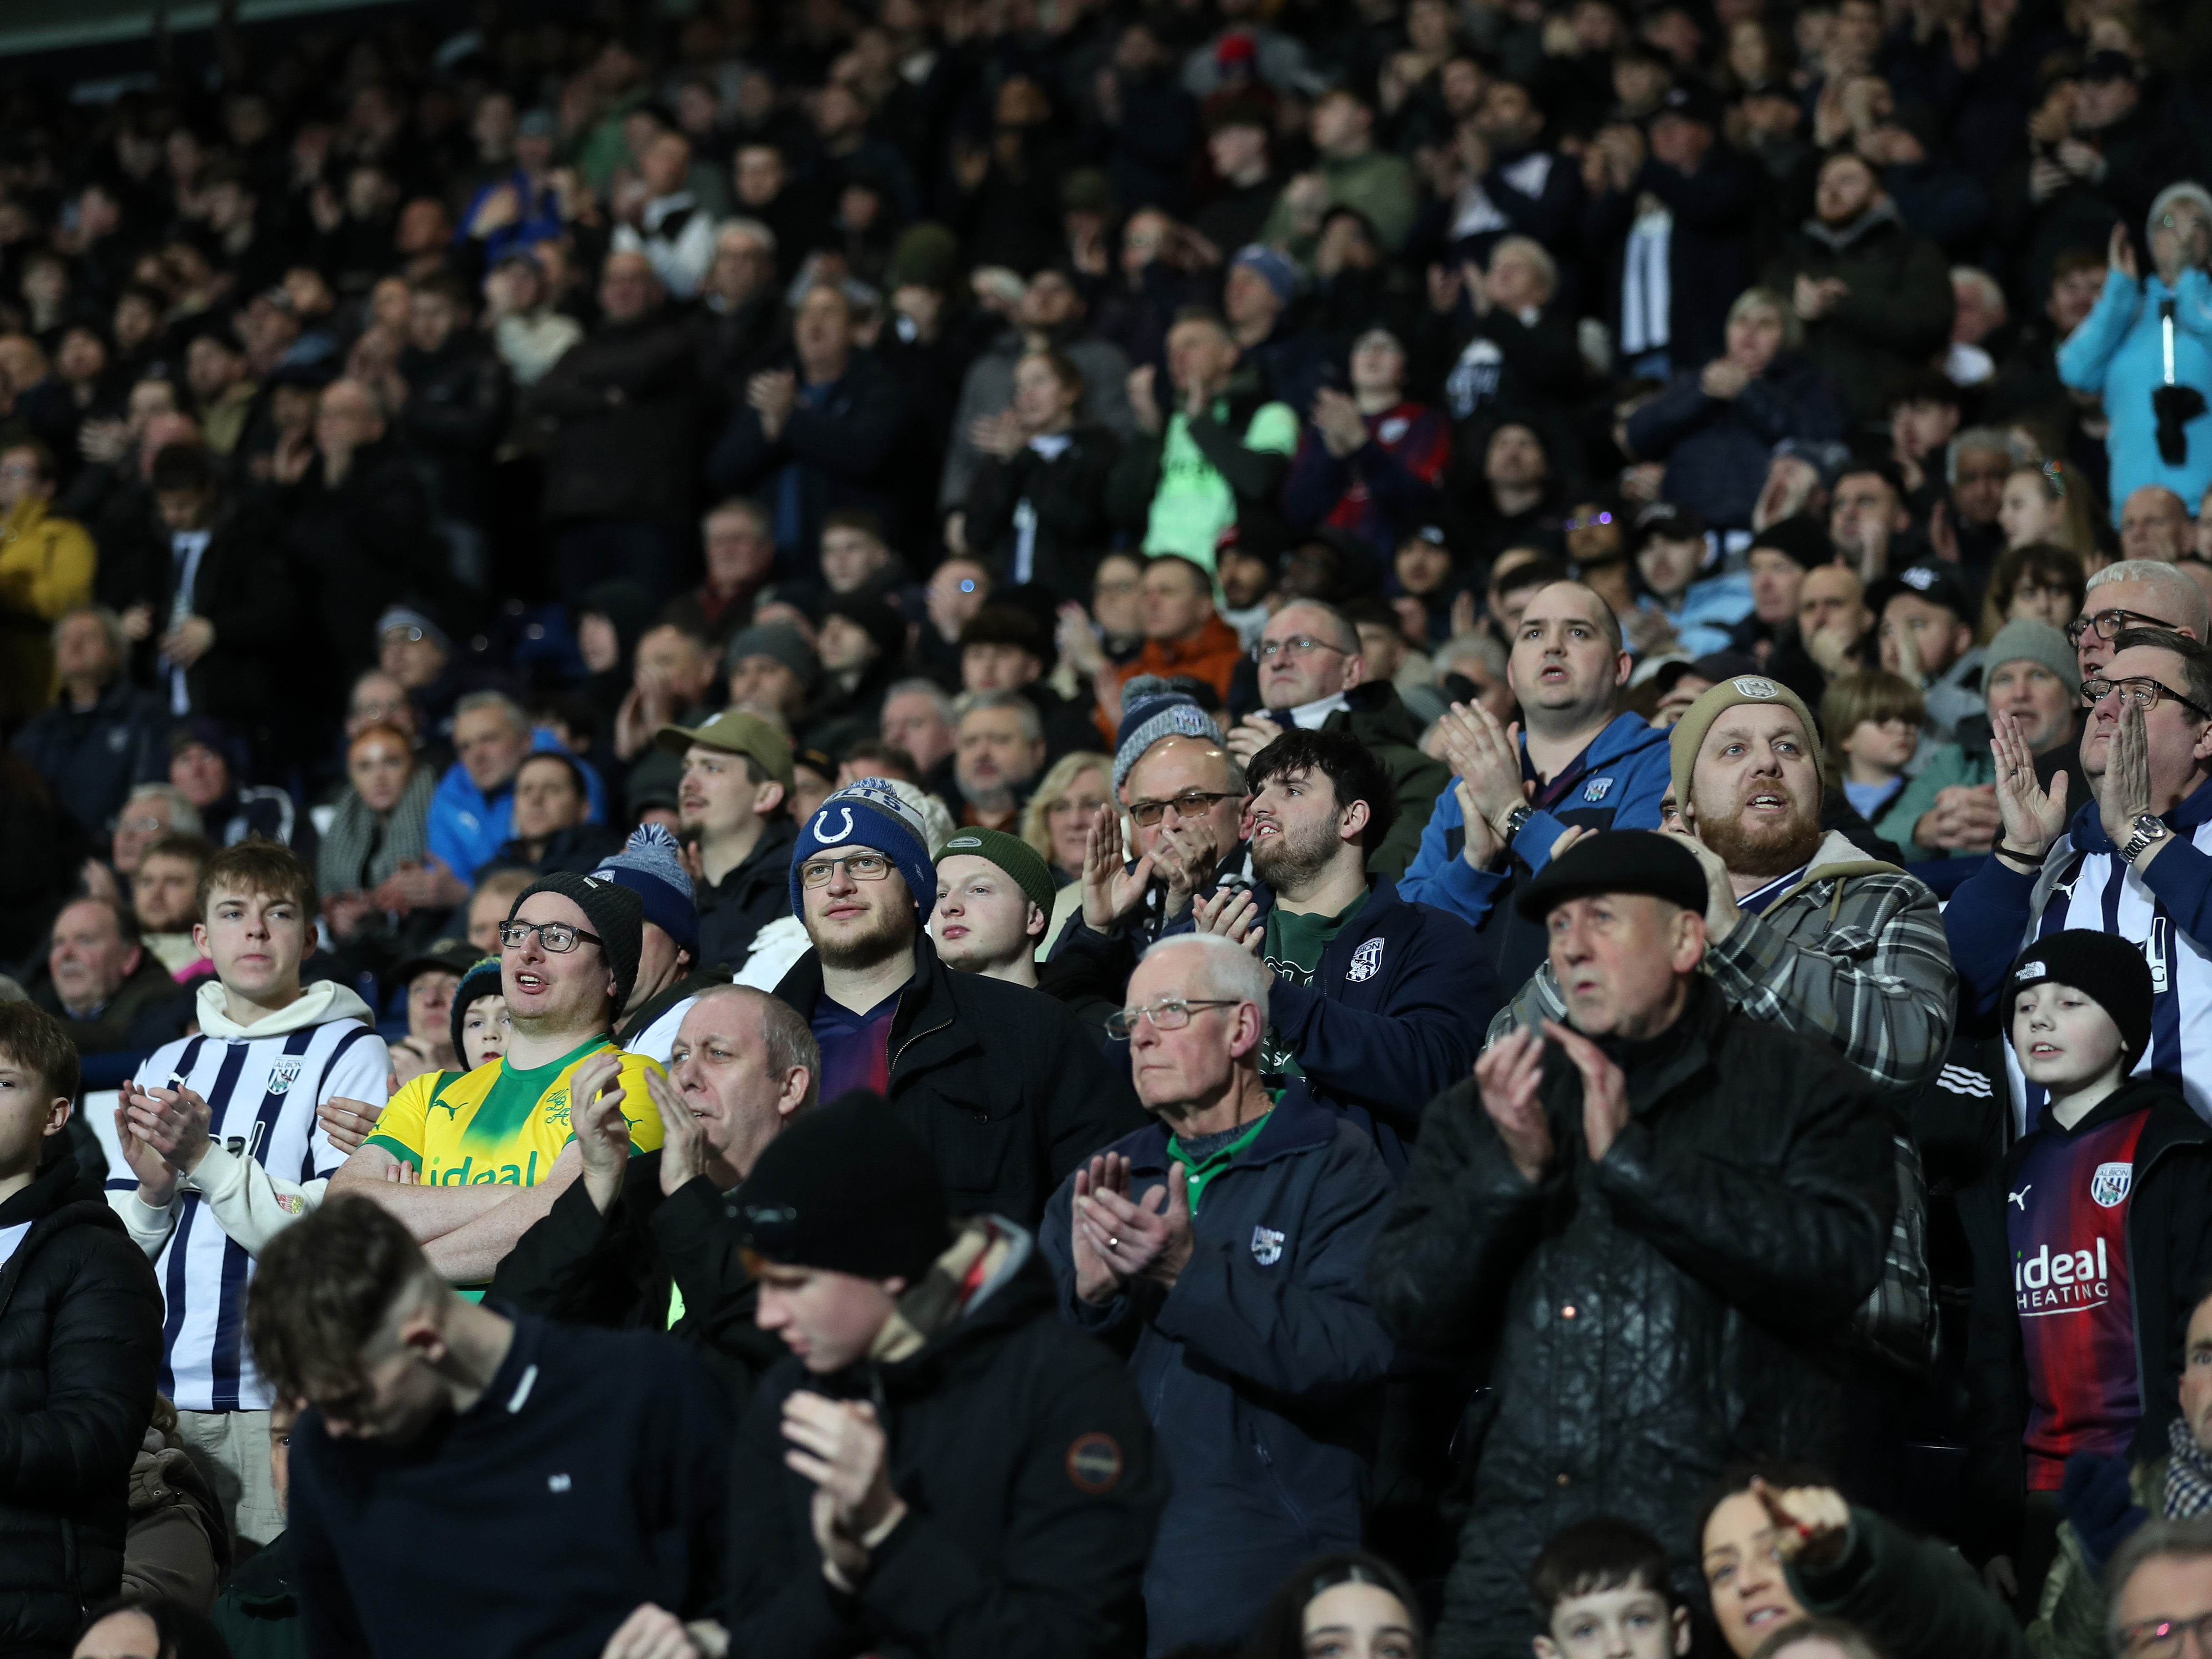 An image of Albion fans clapping for Daryl Dike